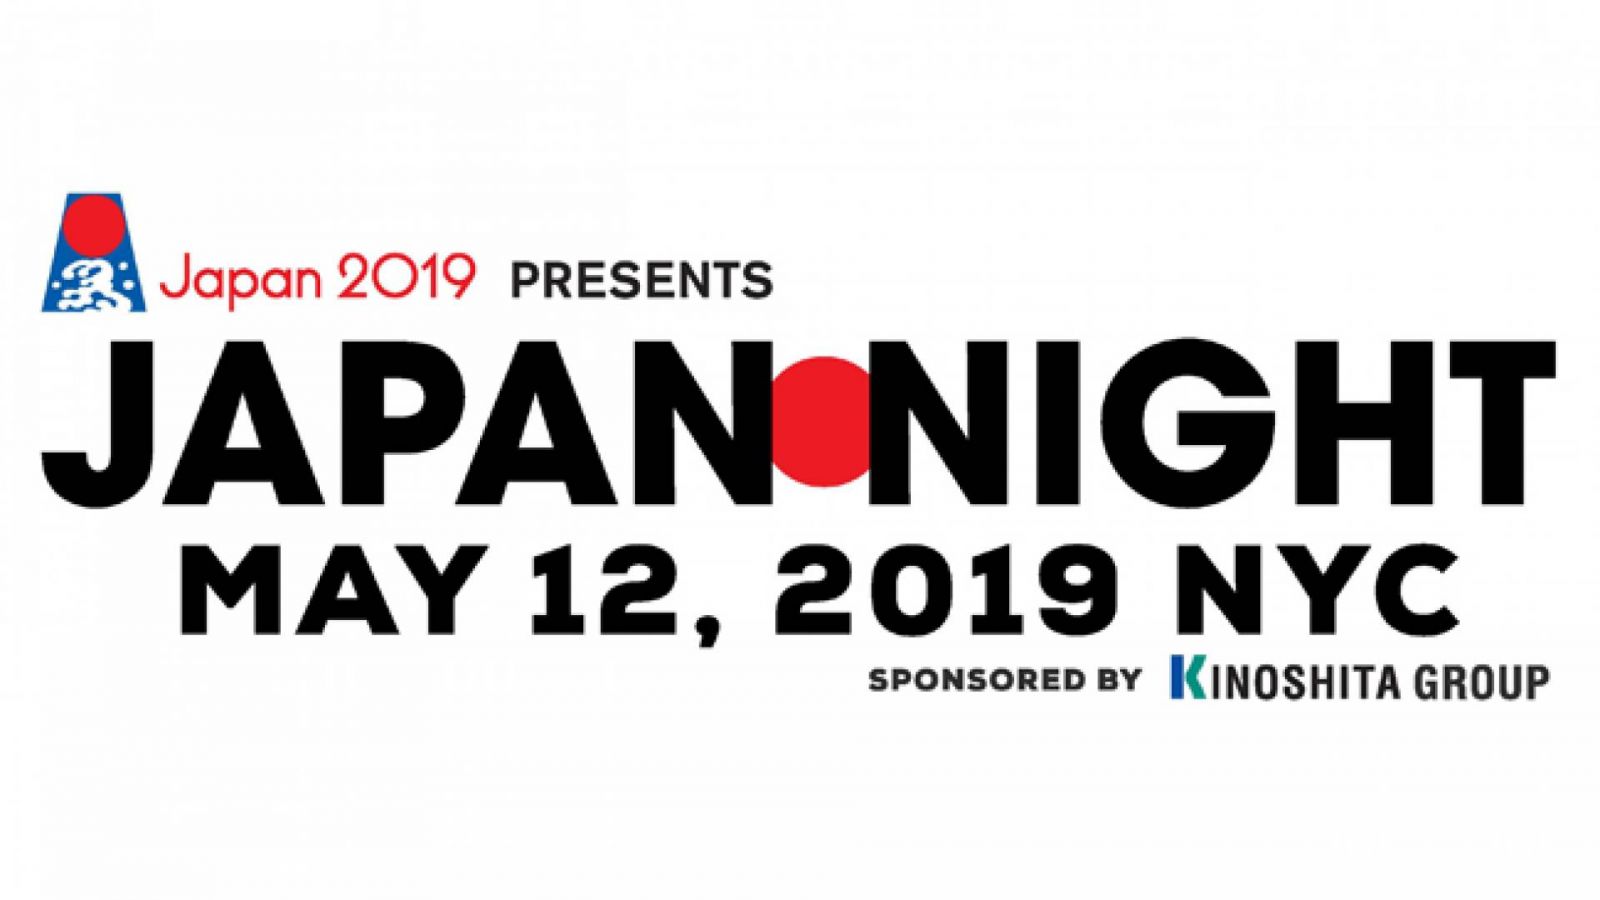 HYDE, WagakkiBand, MISIA and Puffy AmiYumi to Perform at Japan 2019 presents Japan Night in New York City © Japan Night